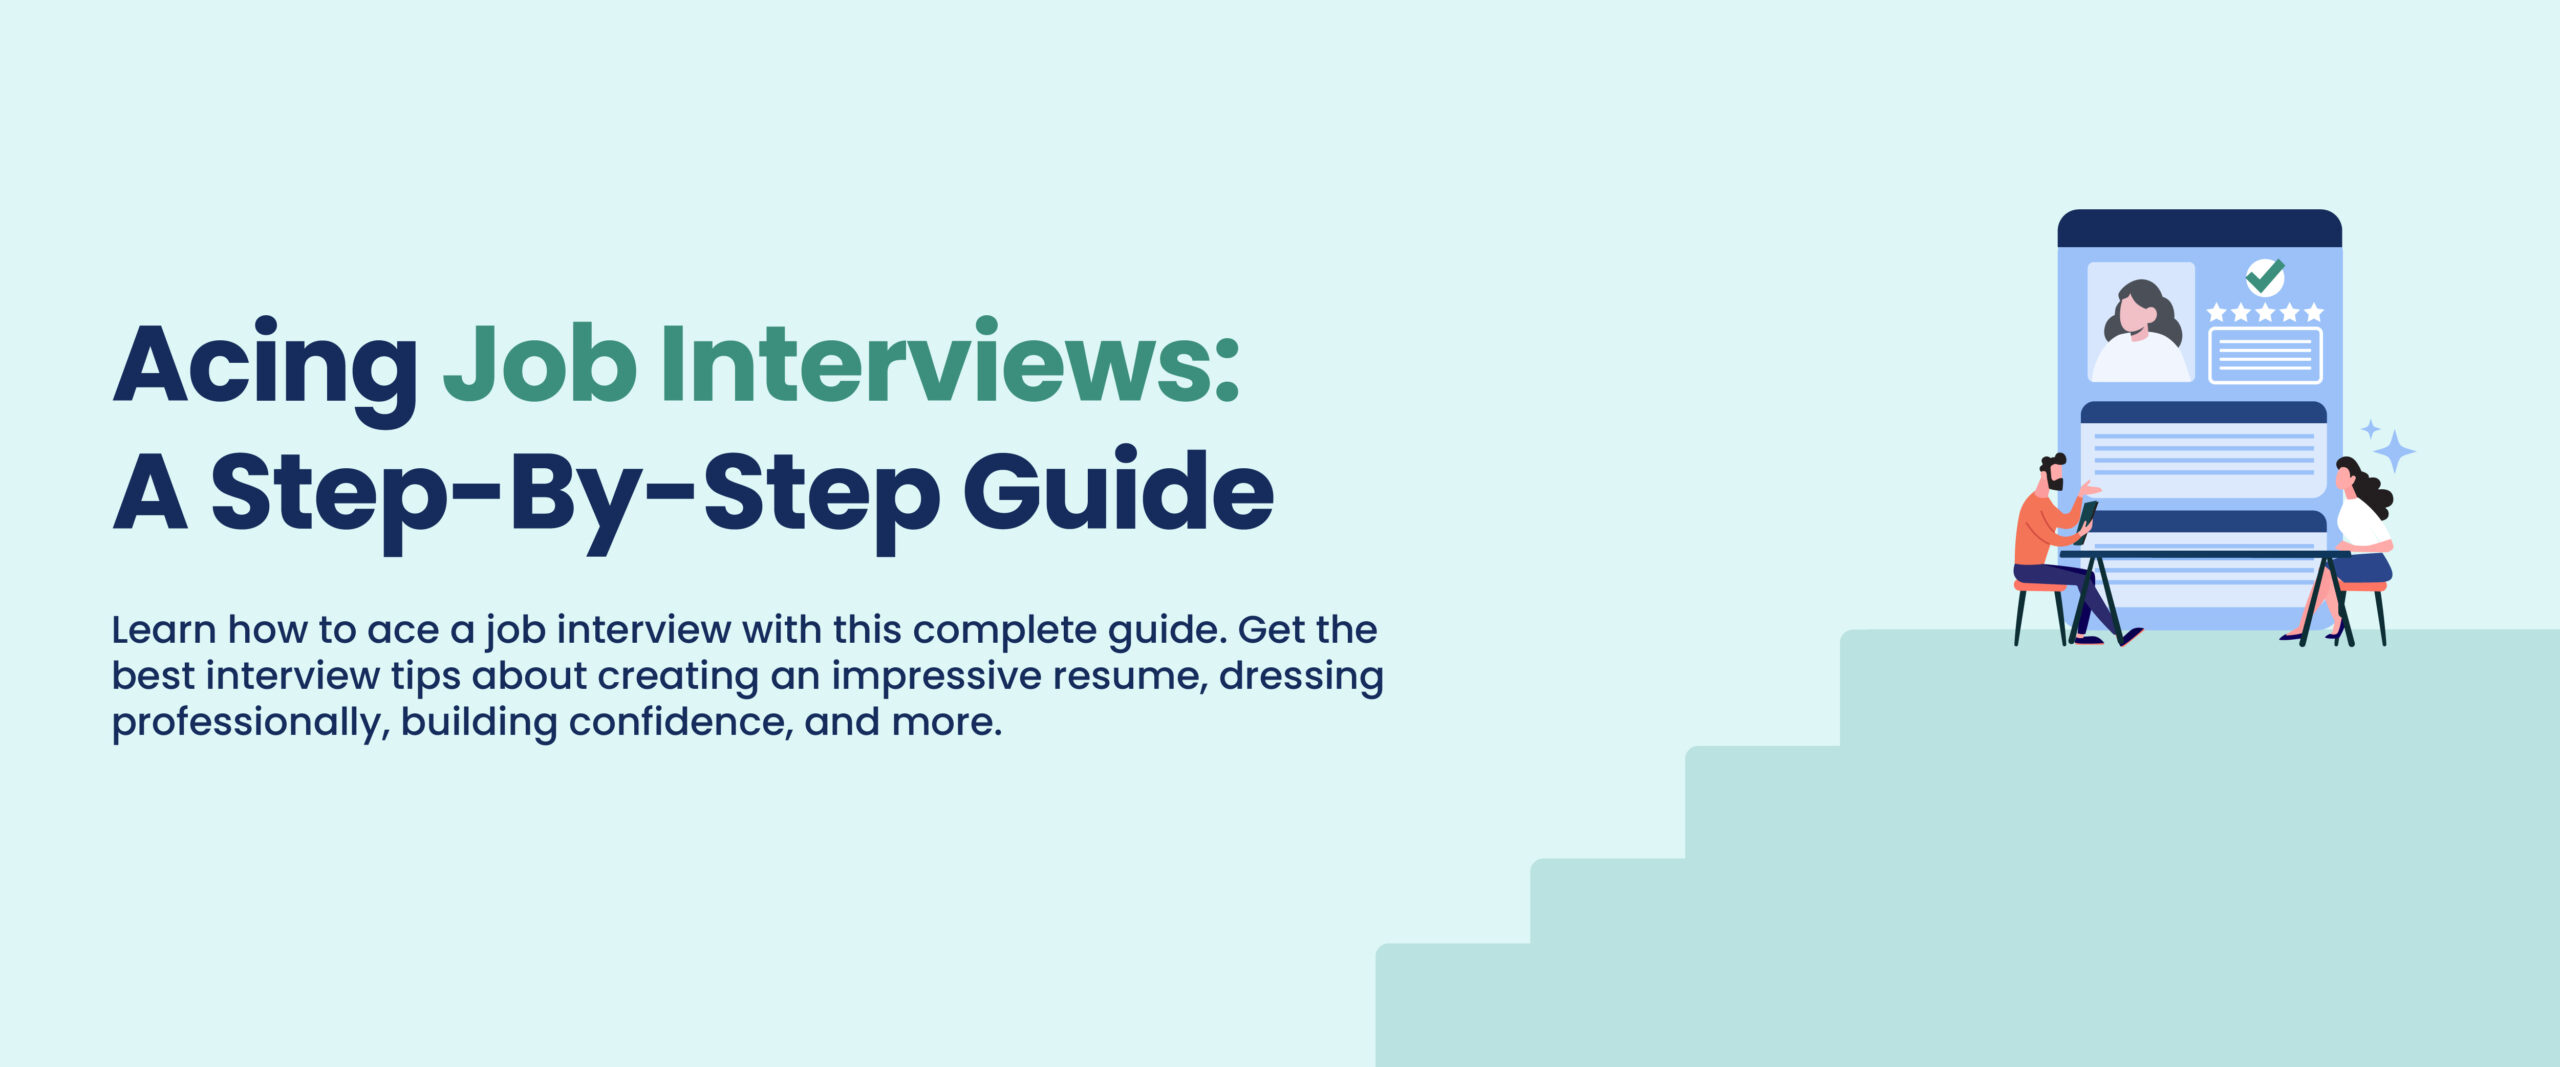 How To Ace An Interview